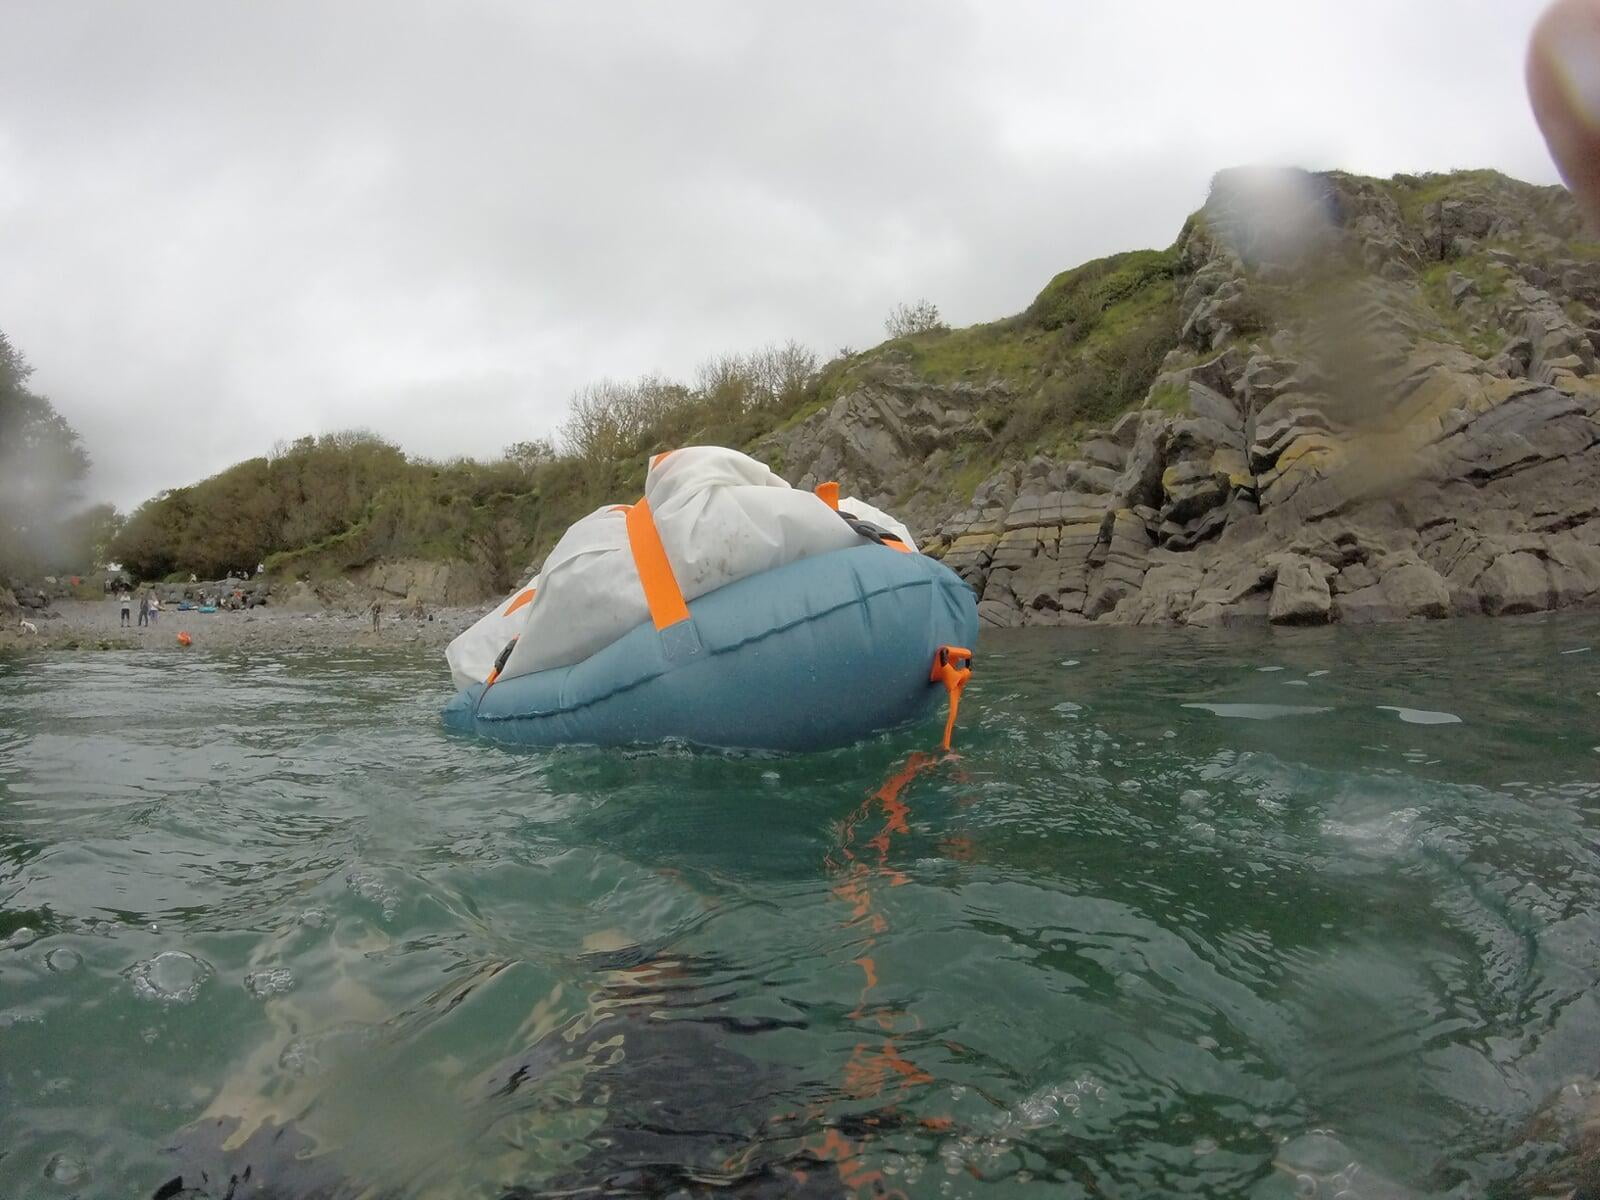 Swim and trekking with a ruckraft in Pembrokeshire